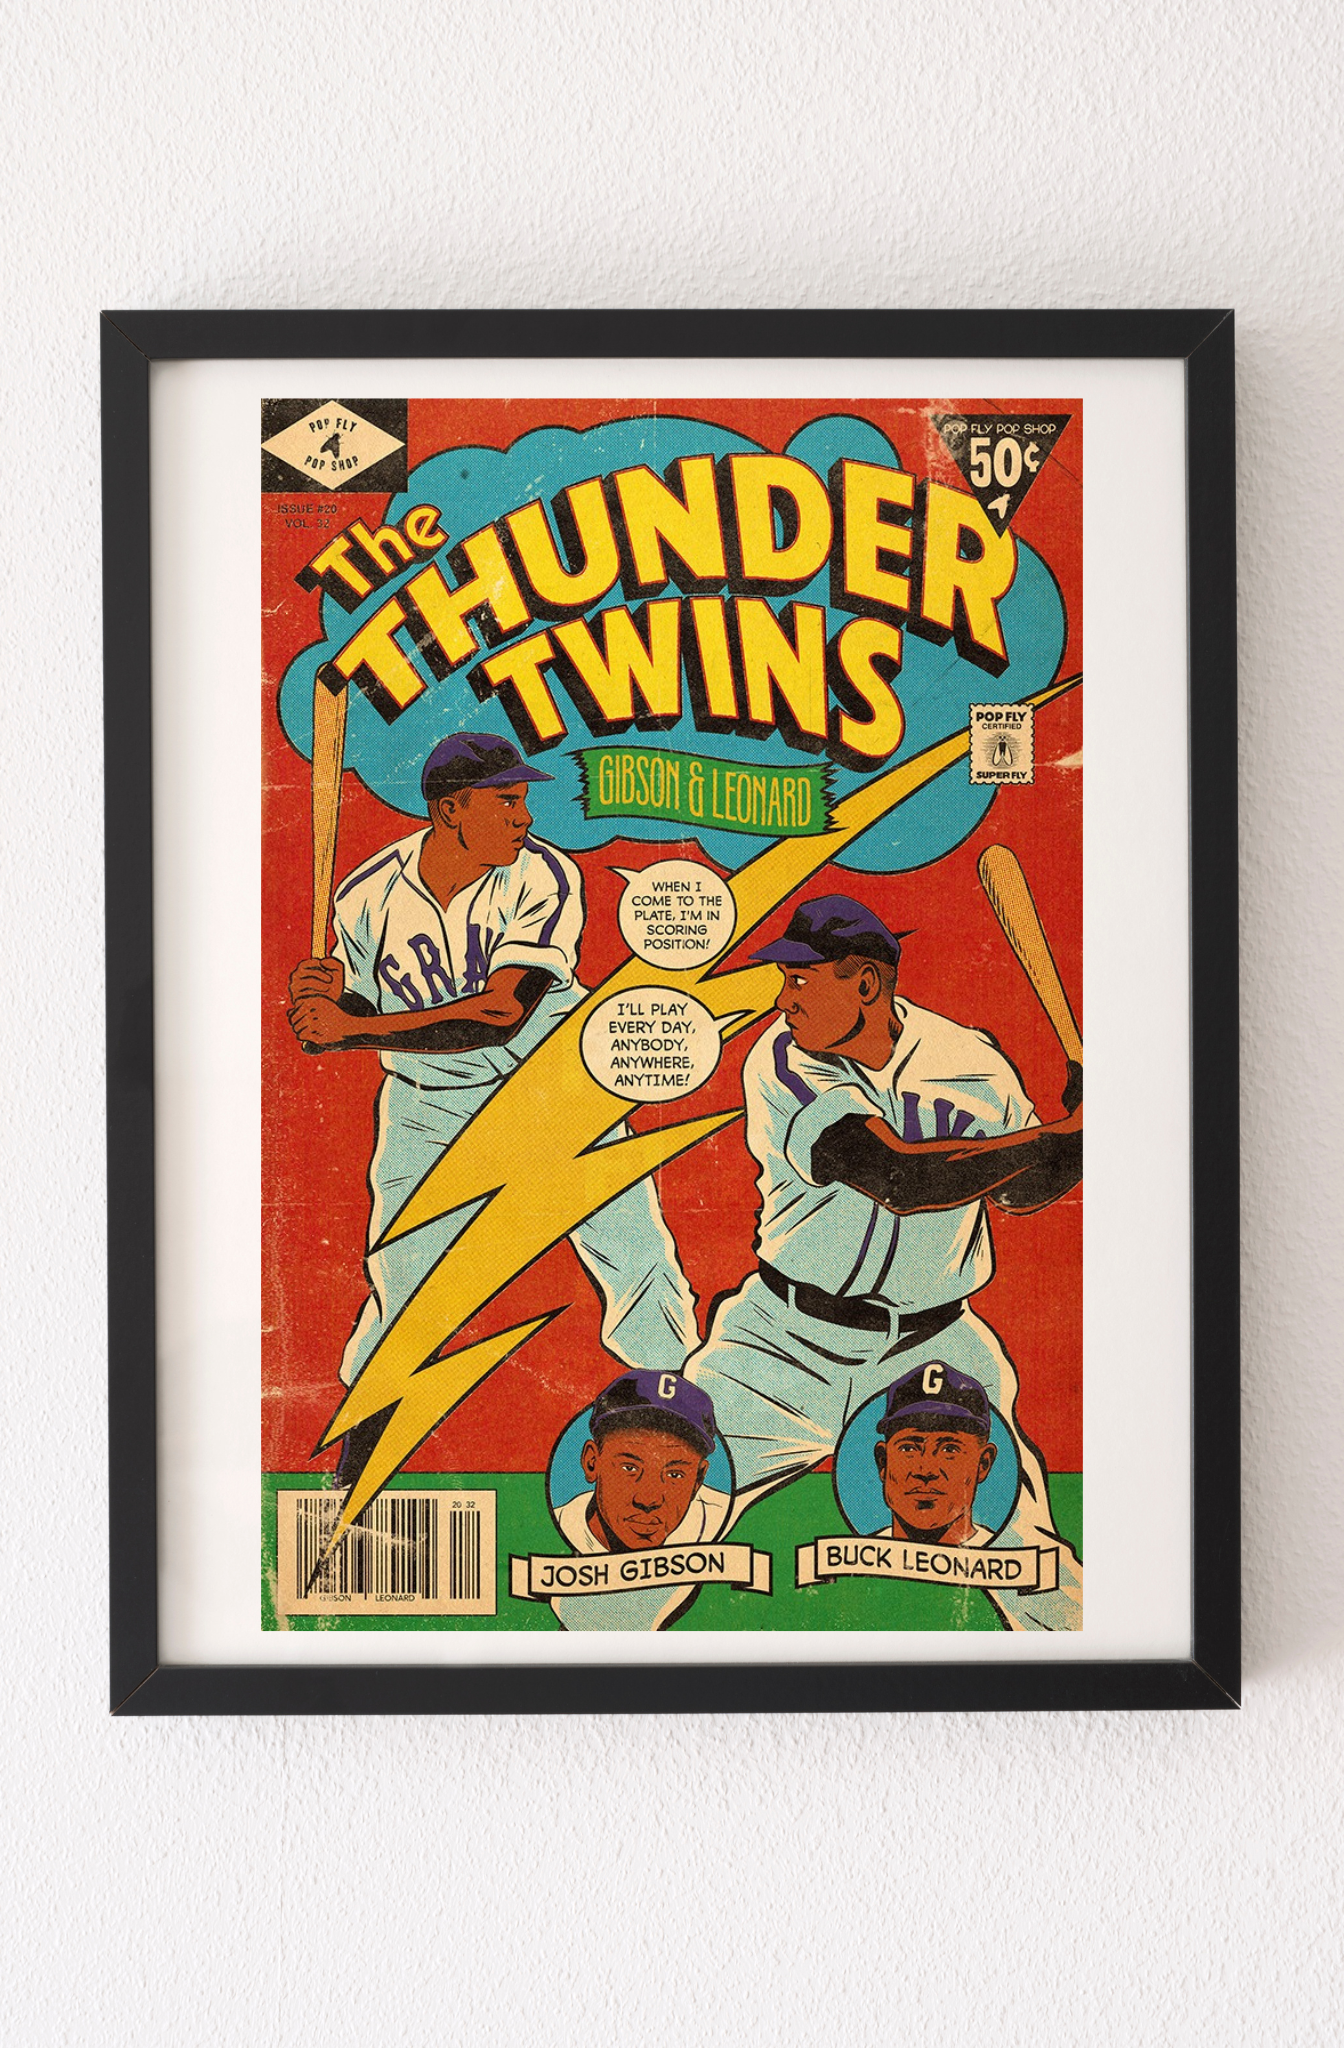 96. (SOLD OUT) "The Thunder Twins" 7" x 10.5" Art Print